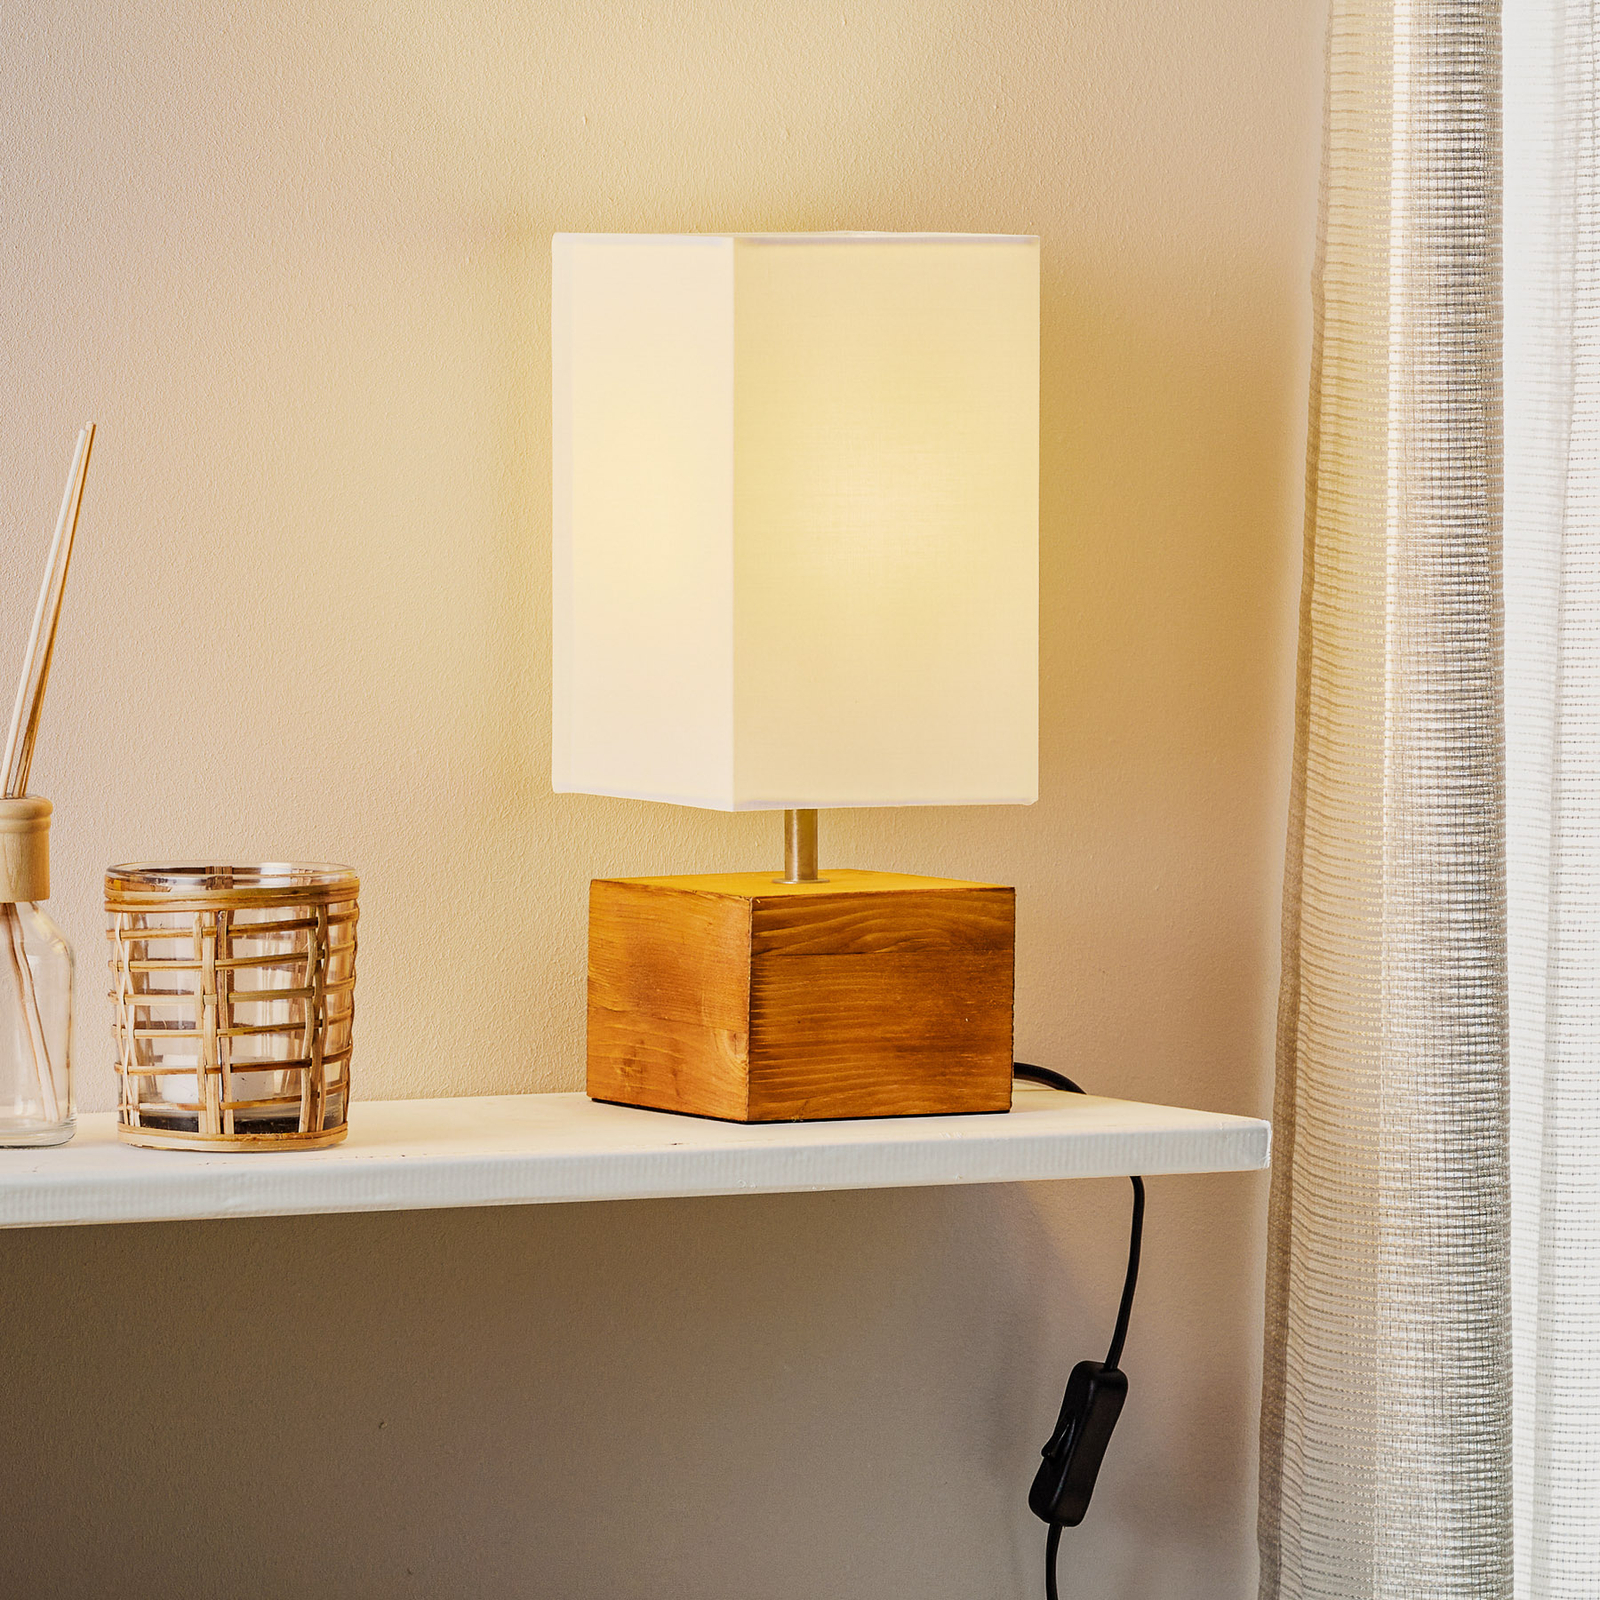 Woody table lamp with wooden base, 12 cm x 12 cm